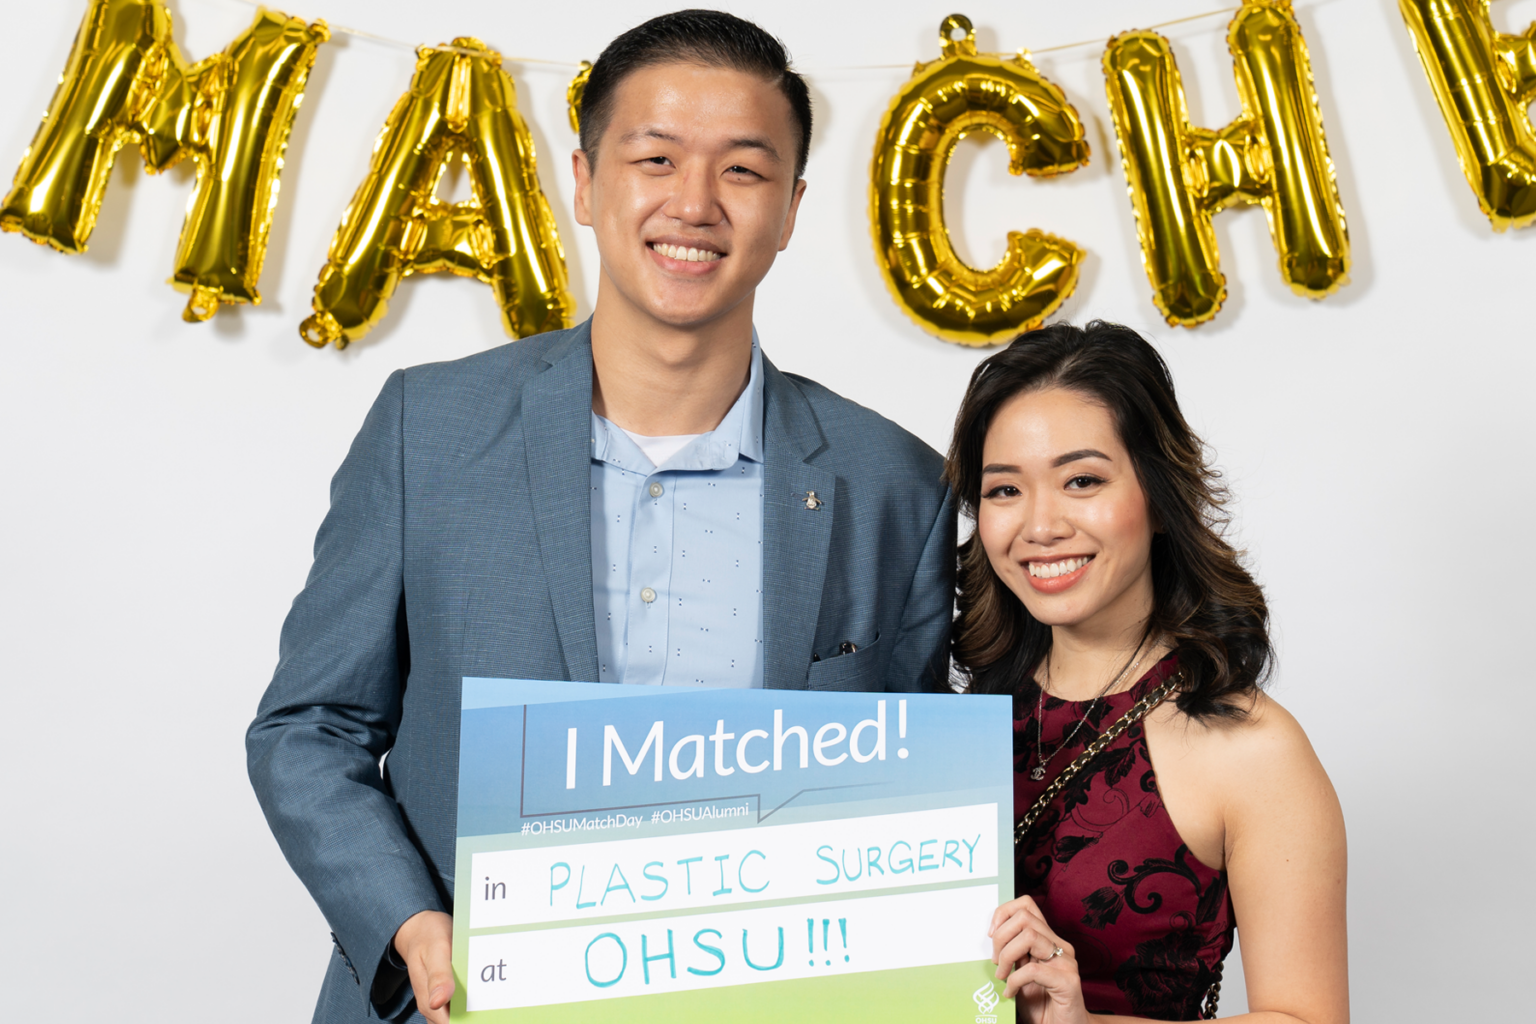 Members of OHSU MD class of ’22 share their Match Day experiences